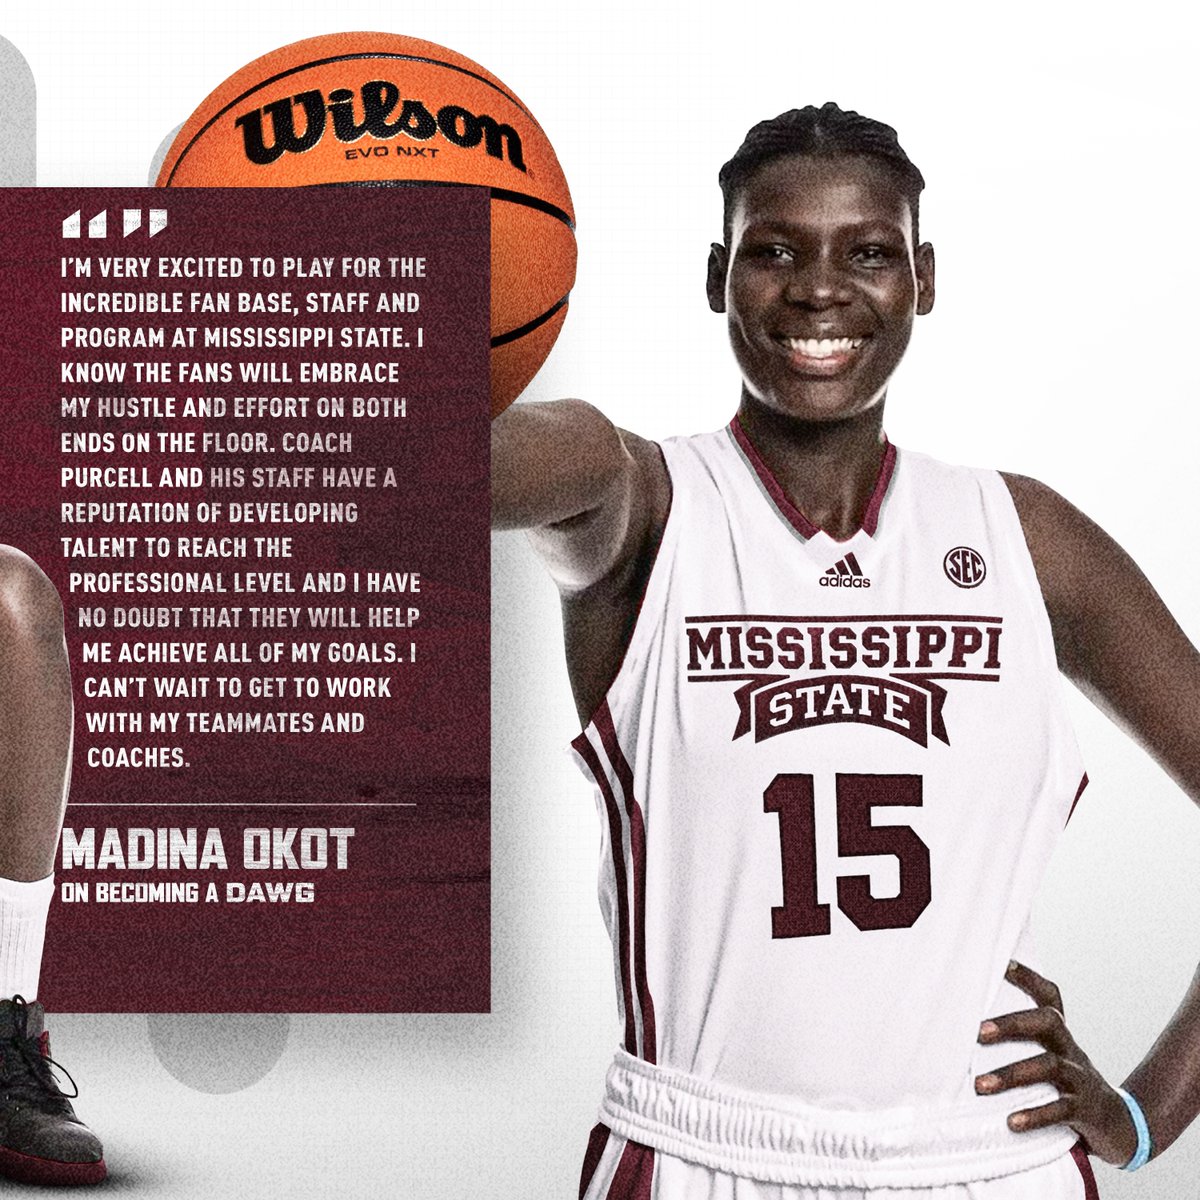 Signed. Sealed. Delivered. ✔️ Welcome to the family, Madina! #HailState🐶